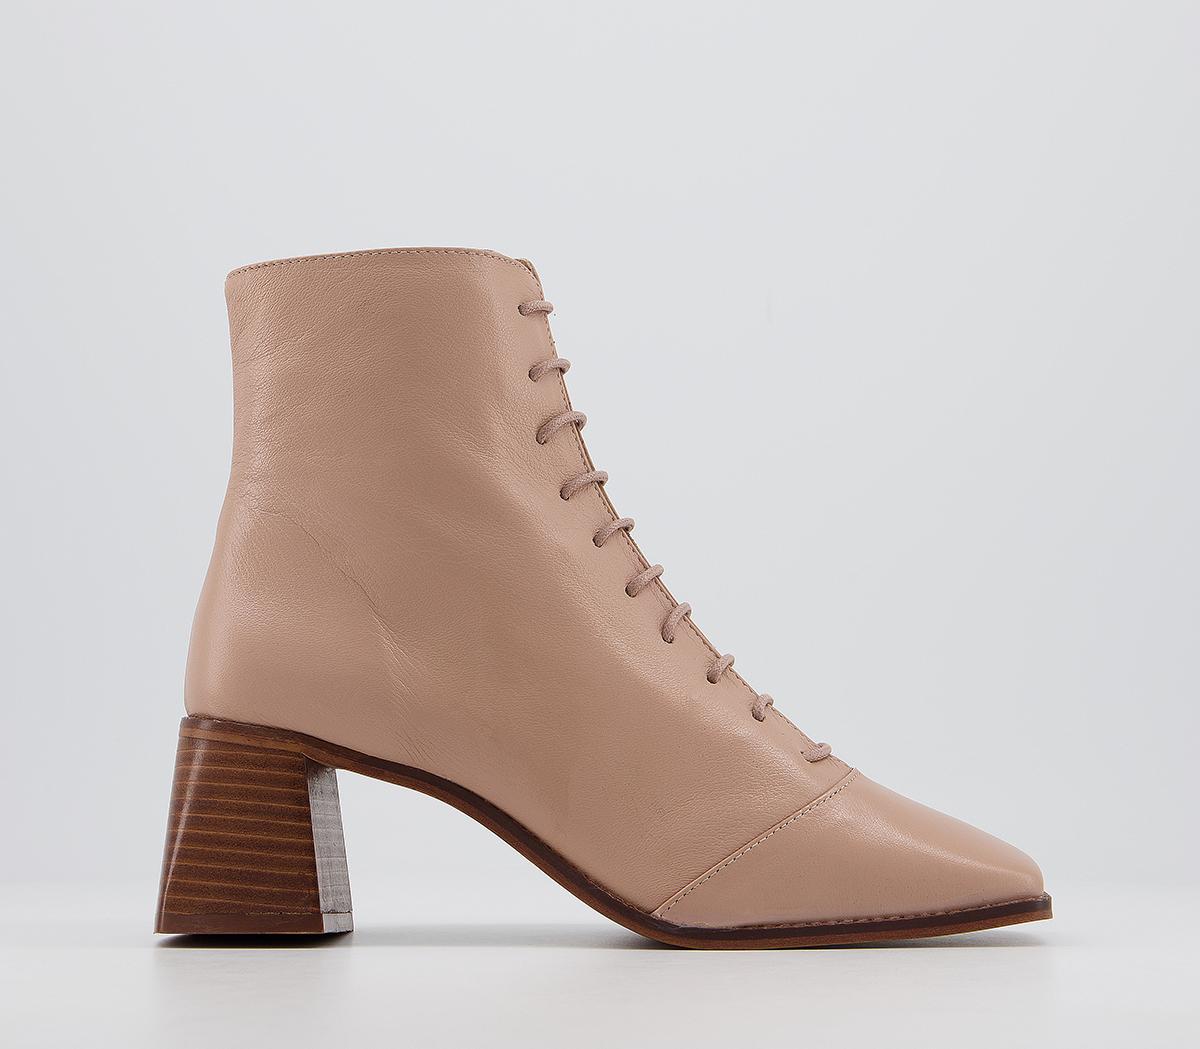 OFFICEAriella Lace Up BootsBiscuit Leather